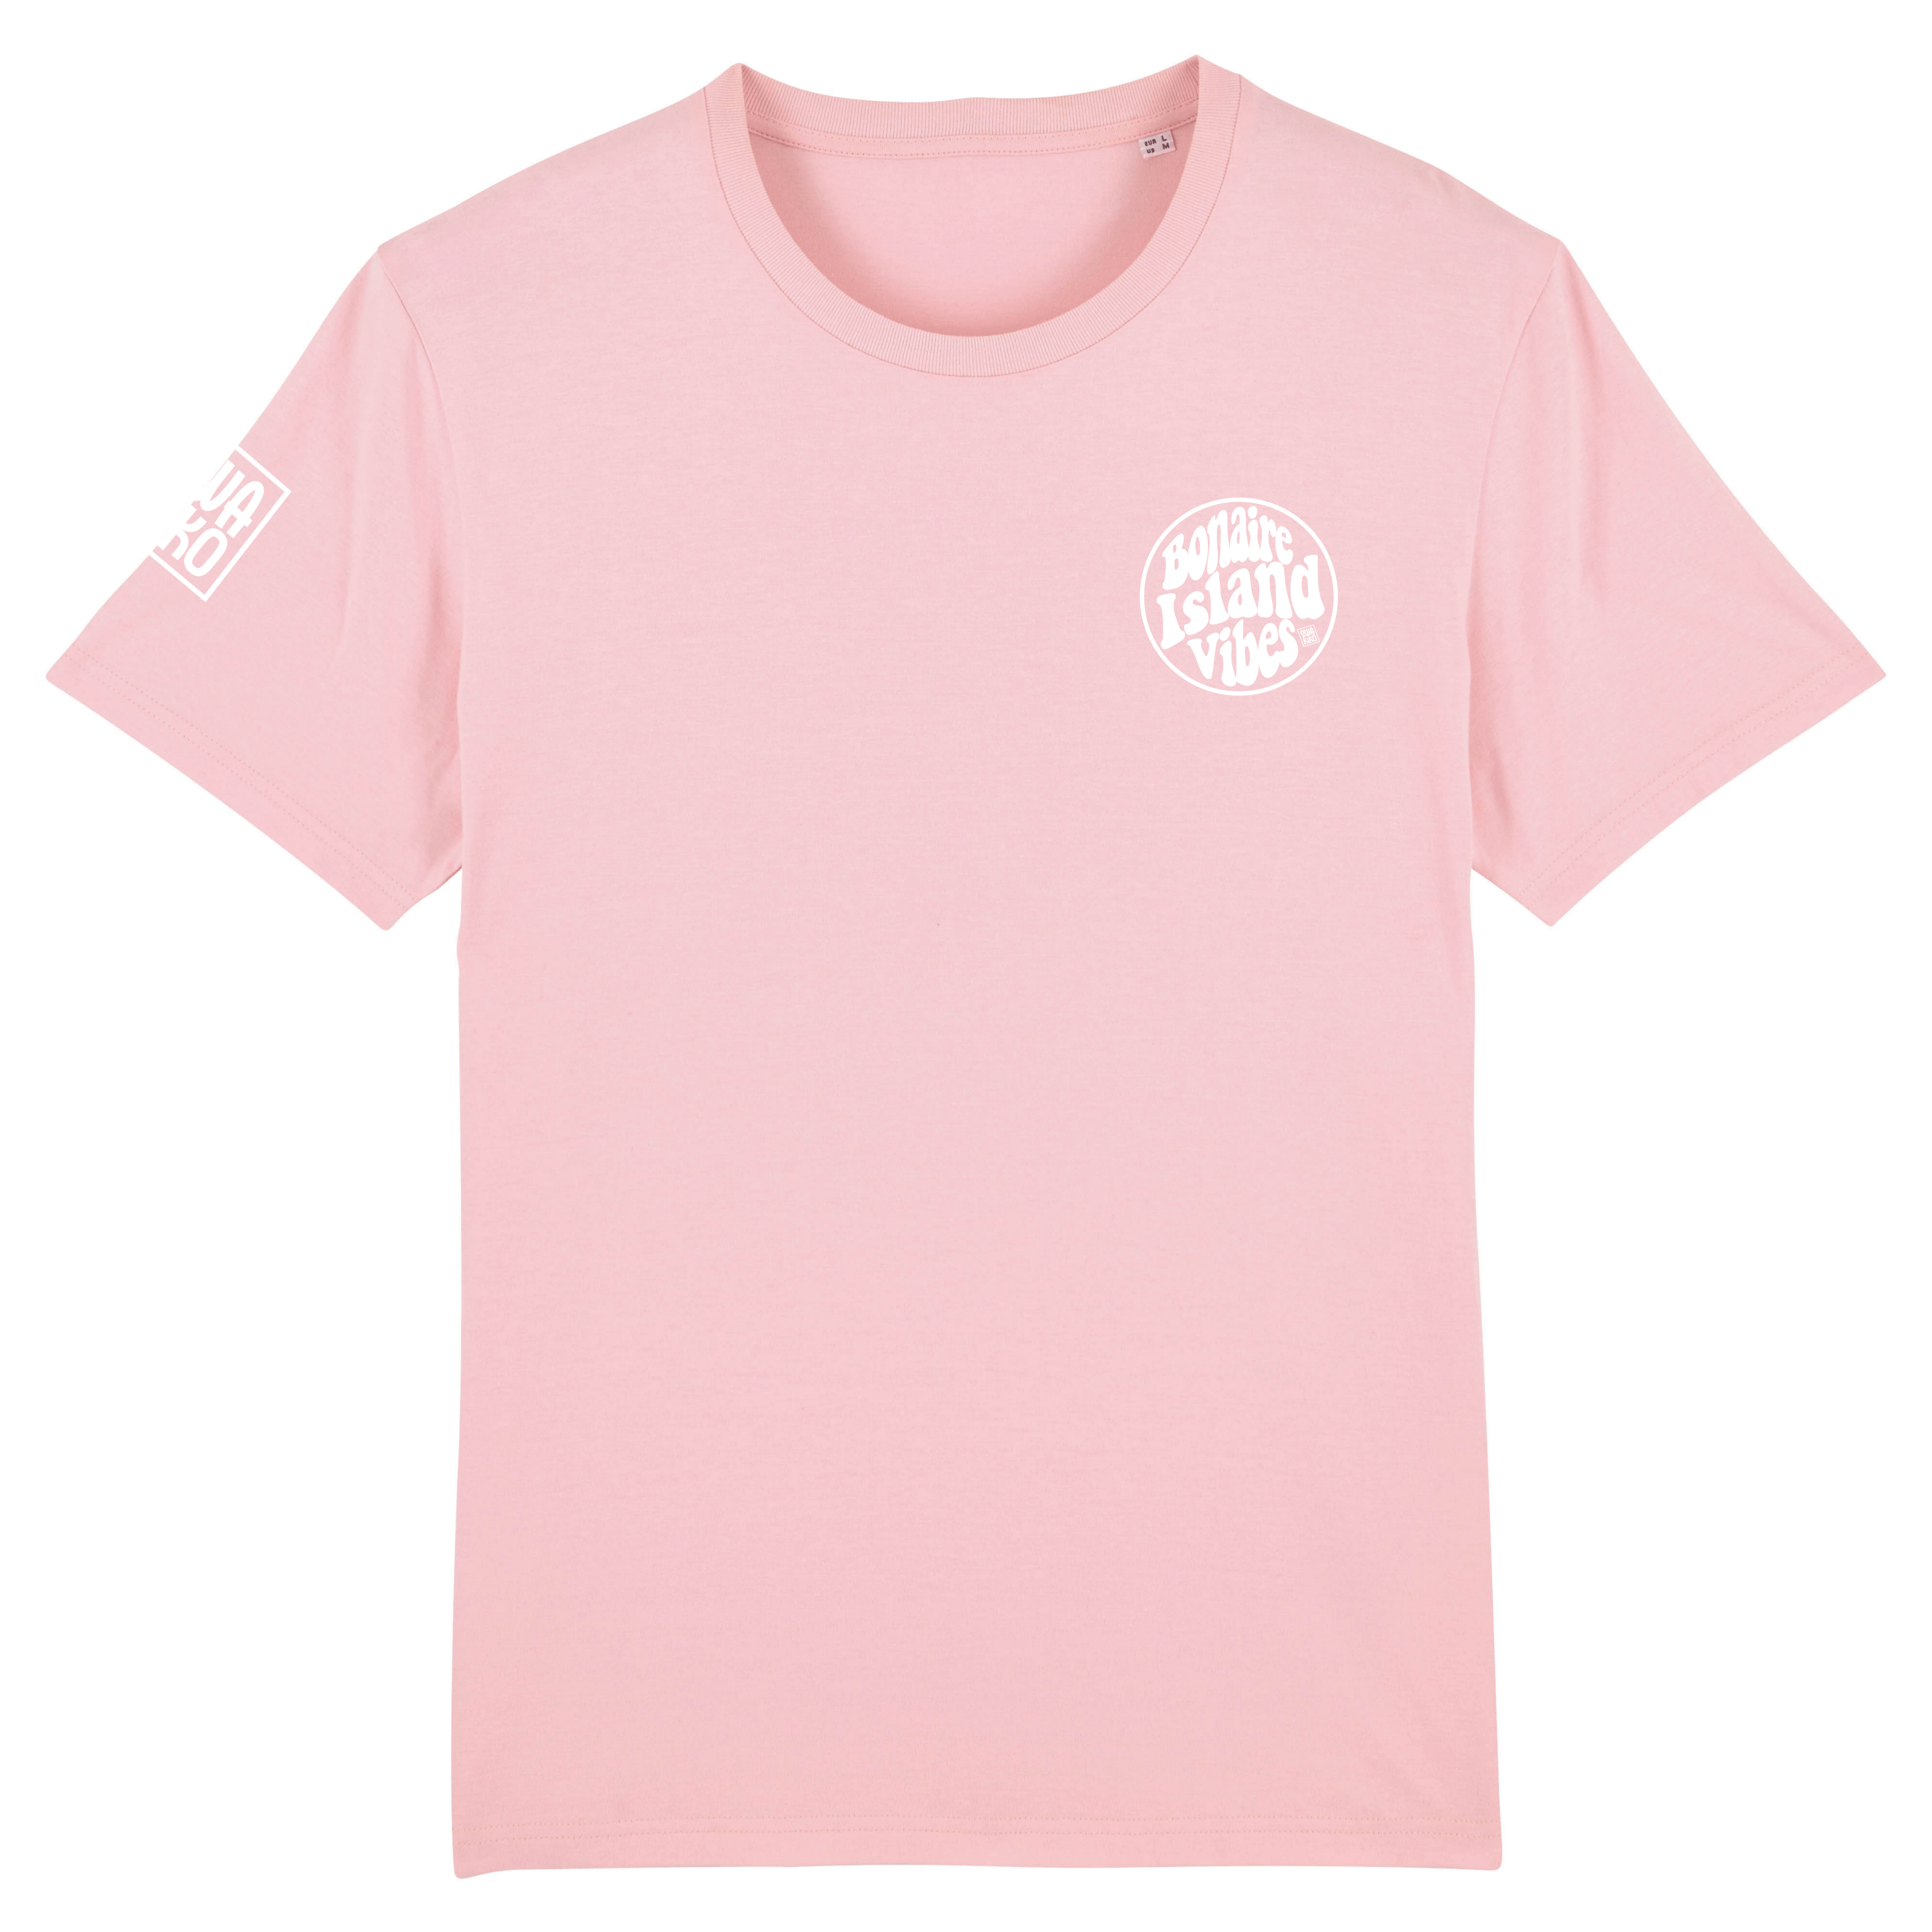 Bonaire Island Vibes, pink T-shirt front